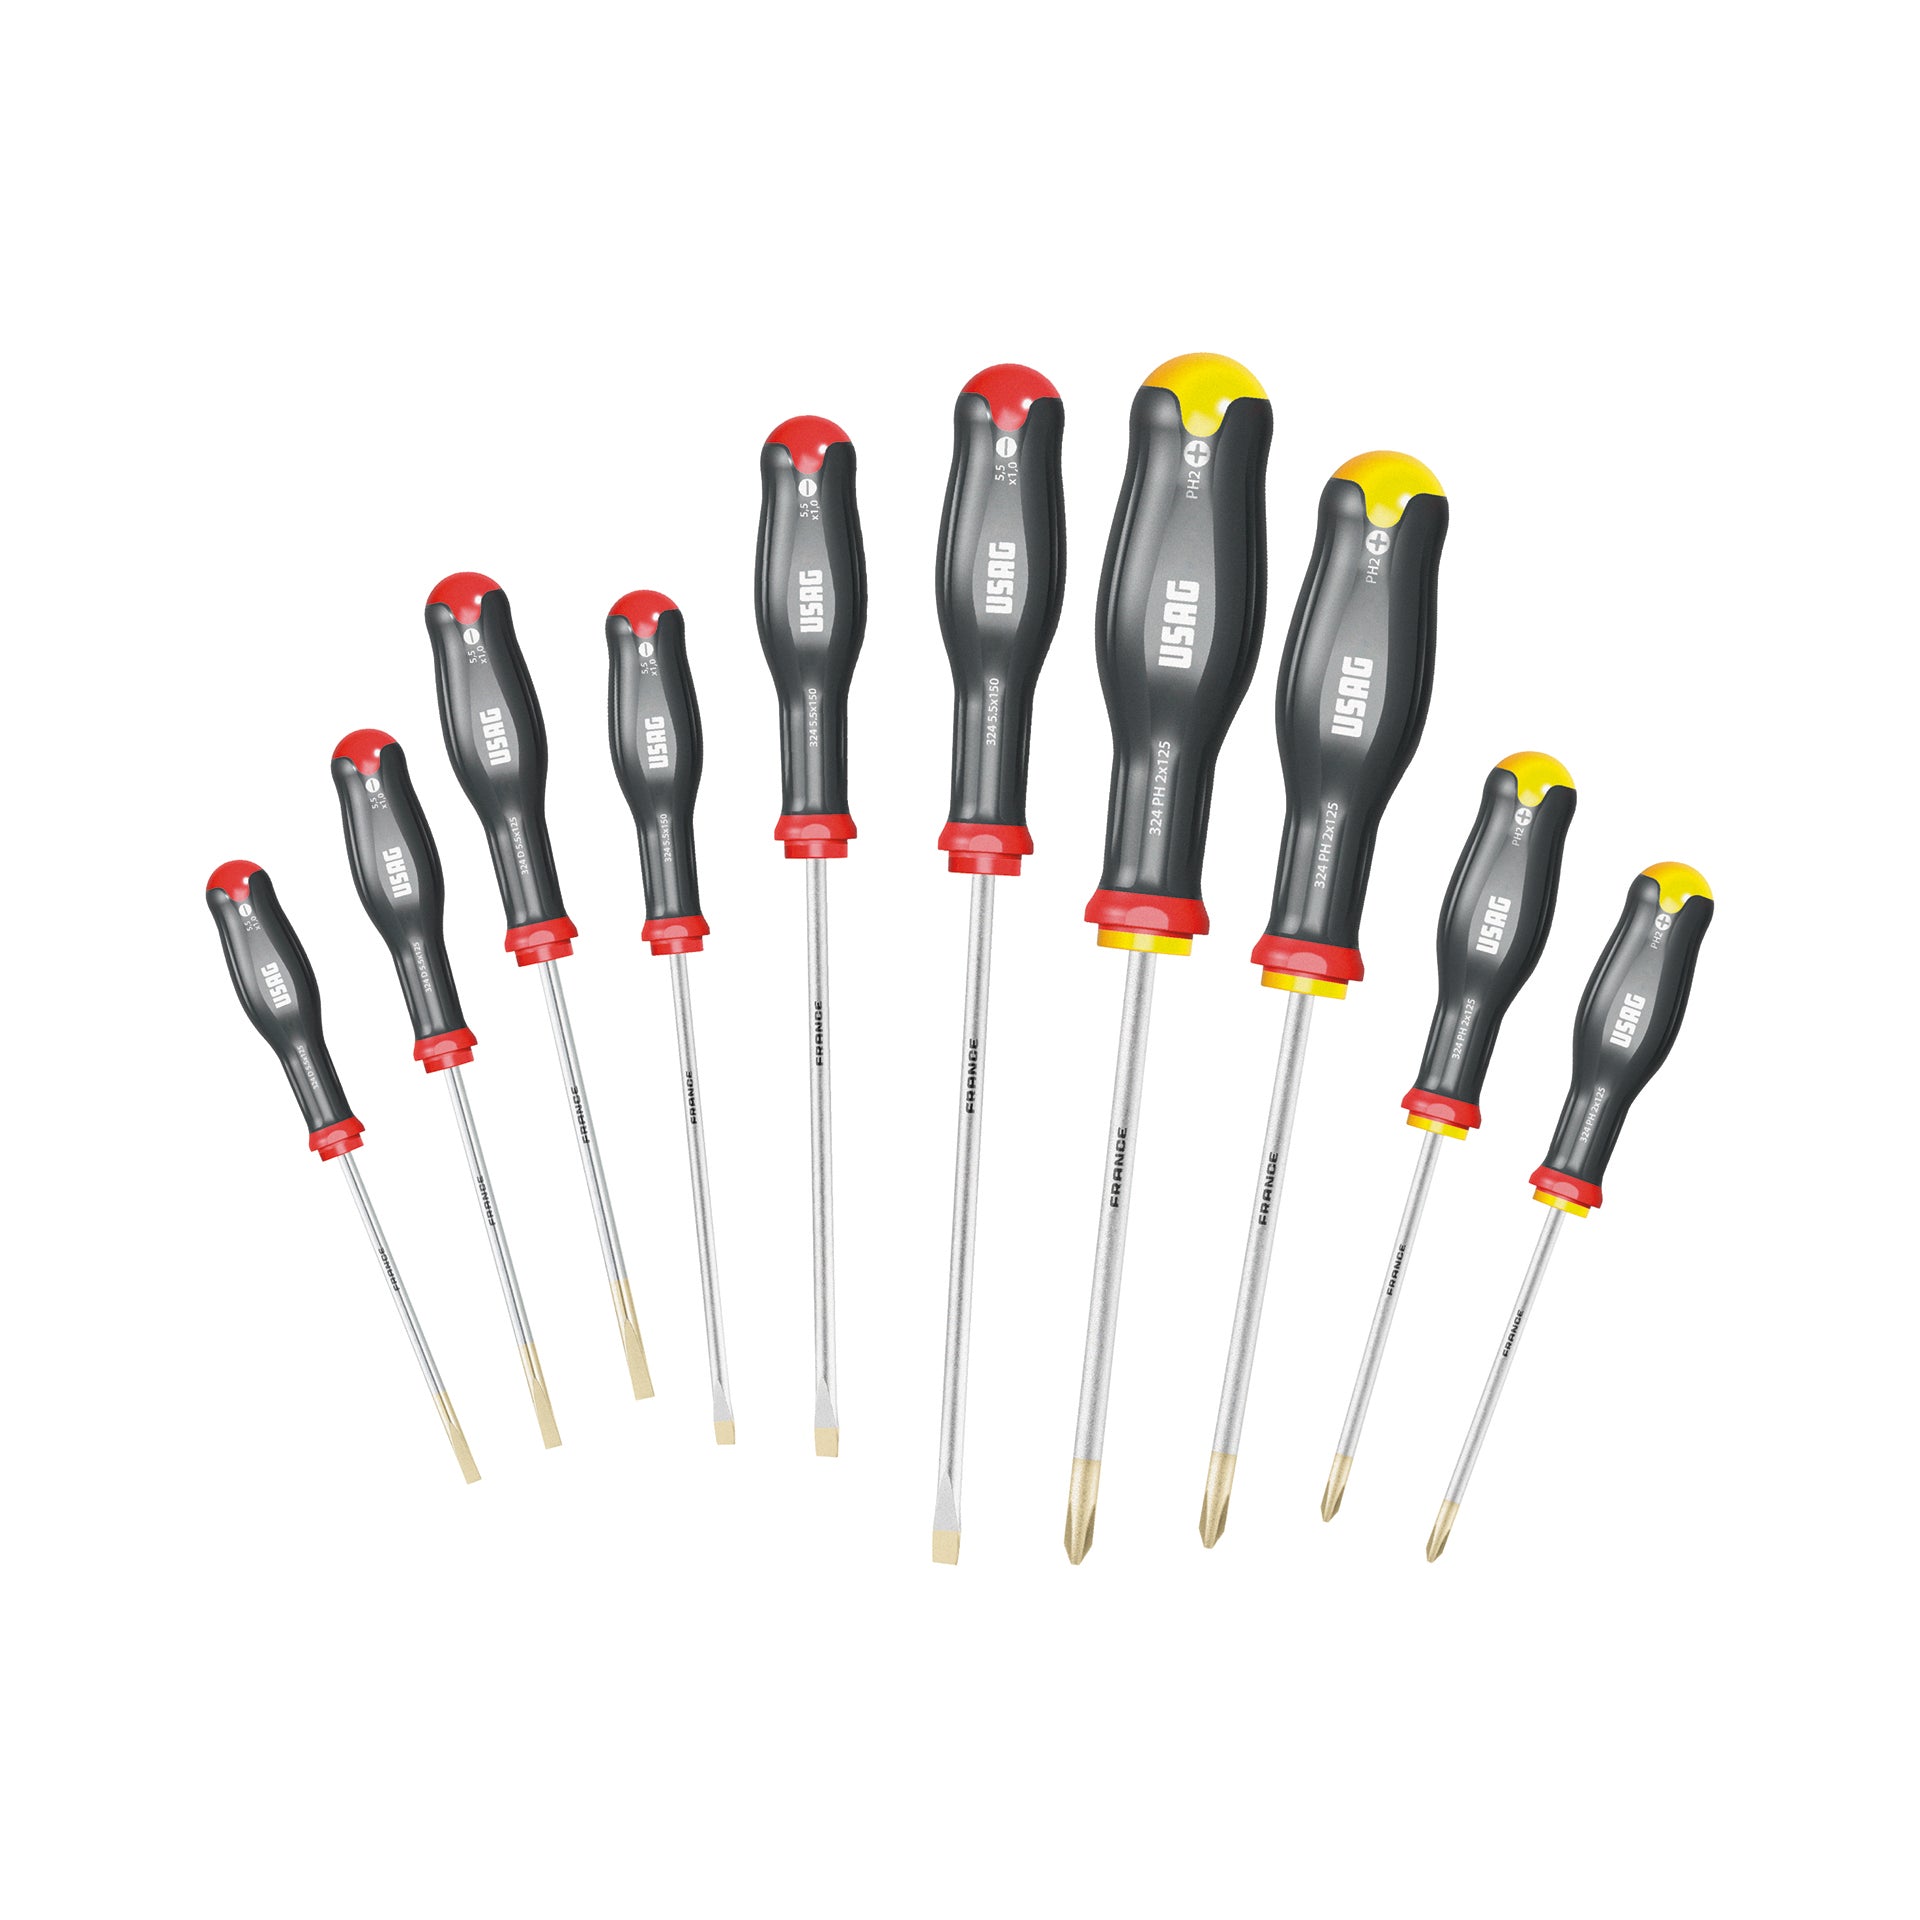 Set of 10 screwdrivers for slot-head and Phillips screws 890gr Usag 324 SH10